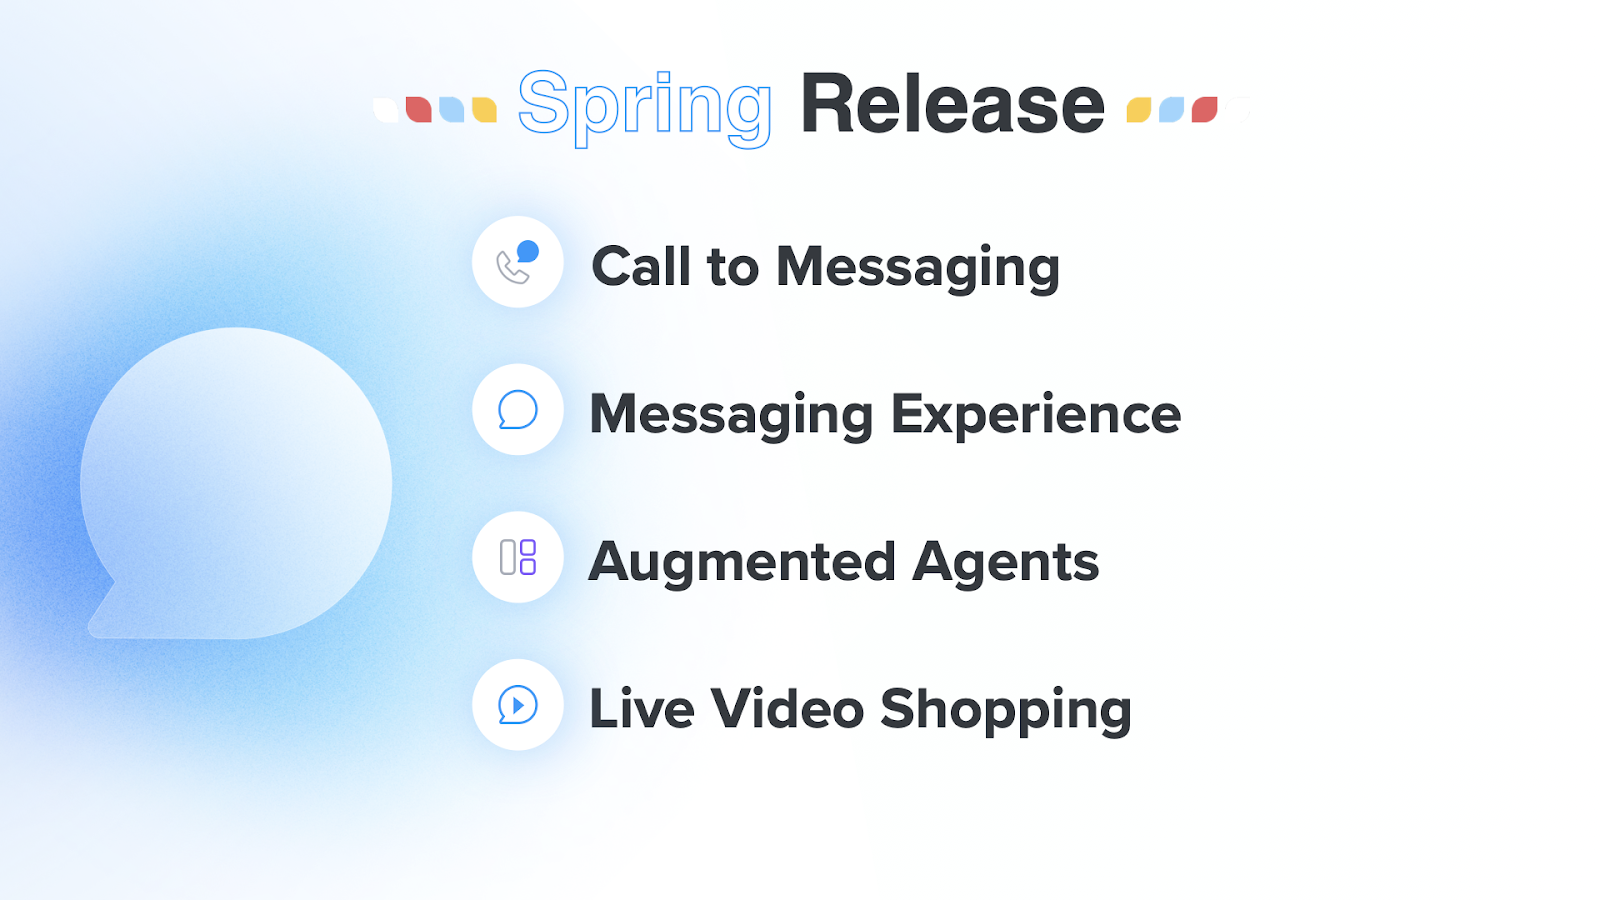 Call to Messaging, Messaging Experience, Augmented Agents, Live Video Shopping